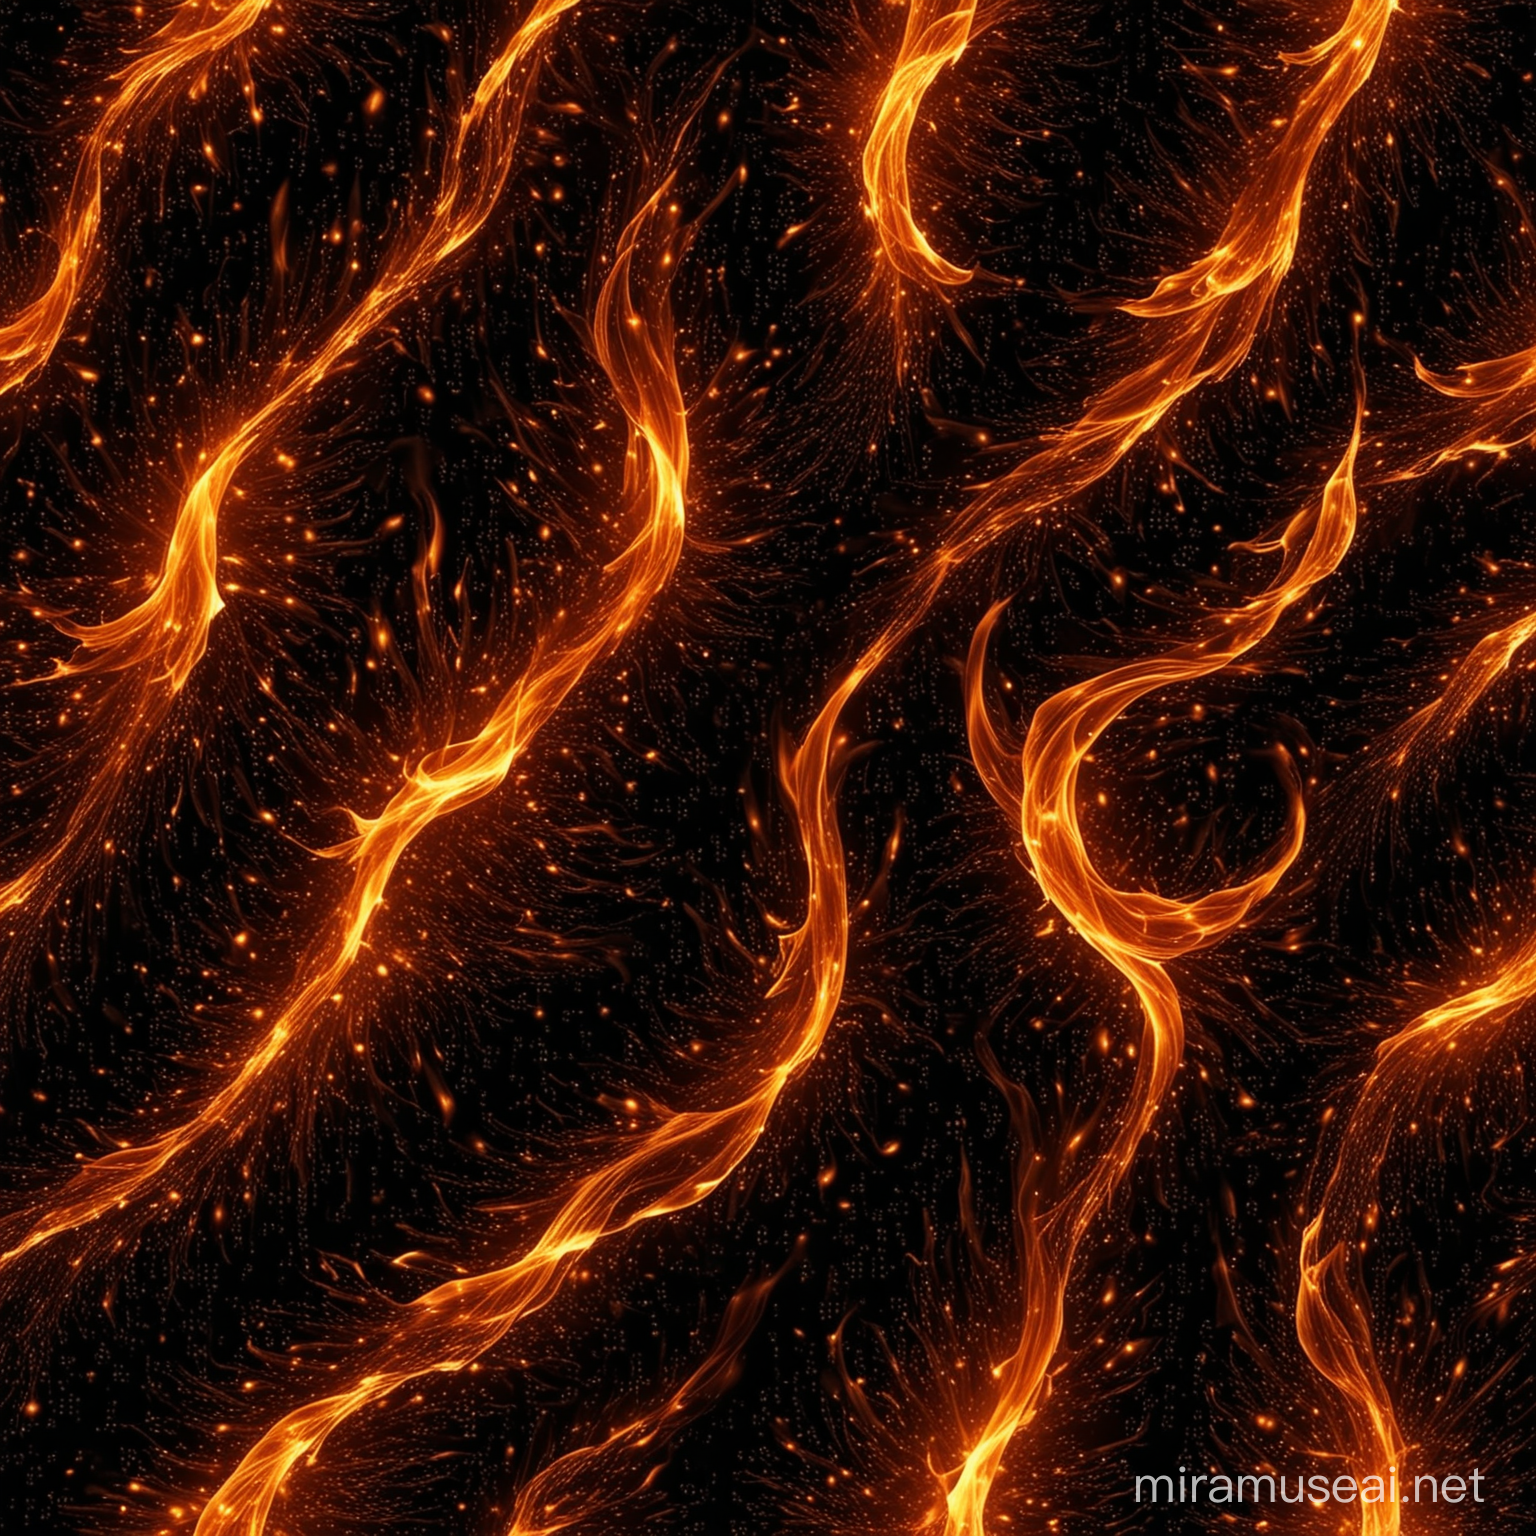 Fiery Abstract Background Pattern of Flames on Black